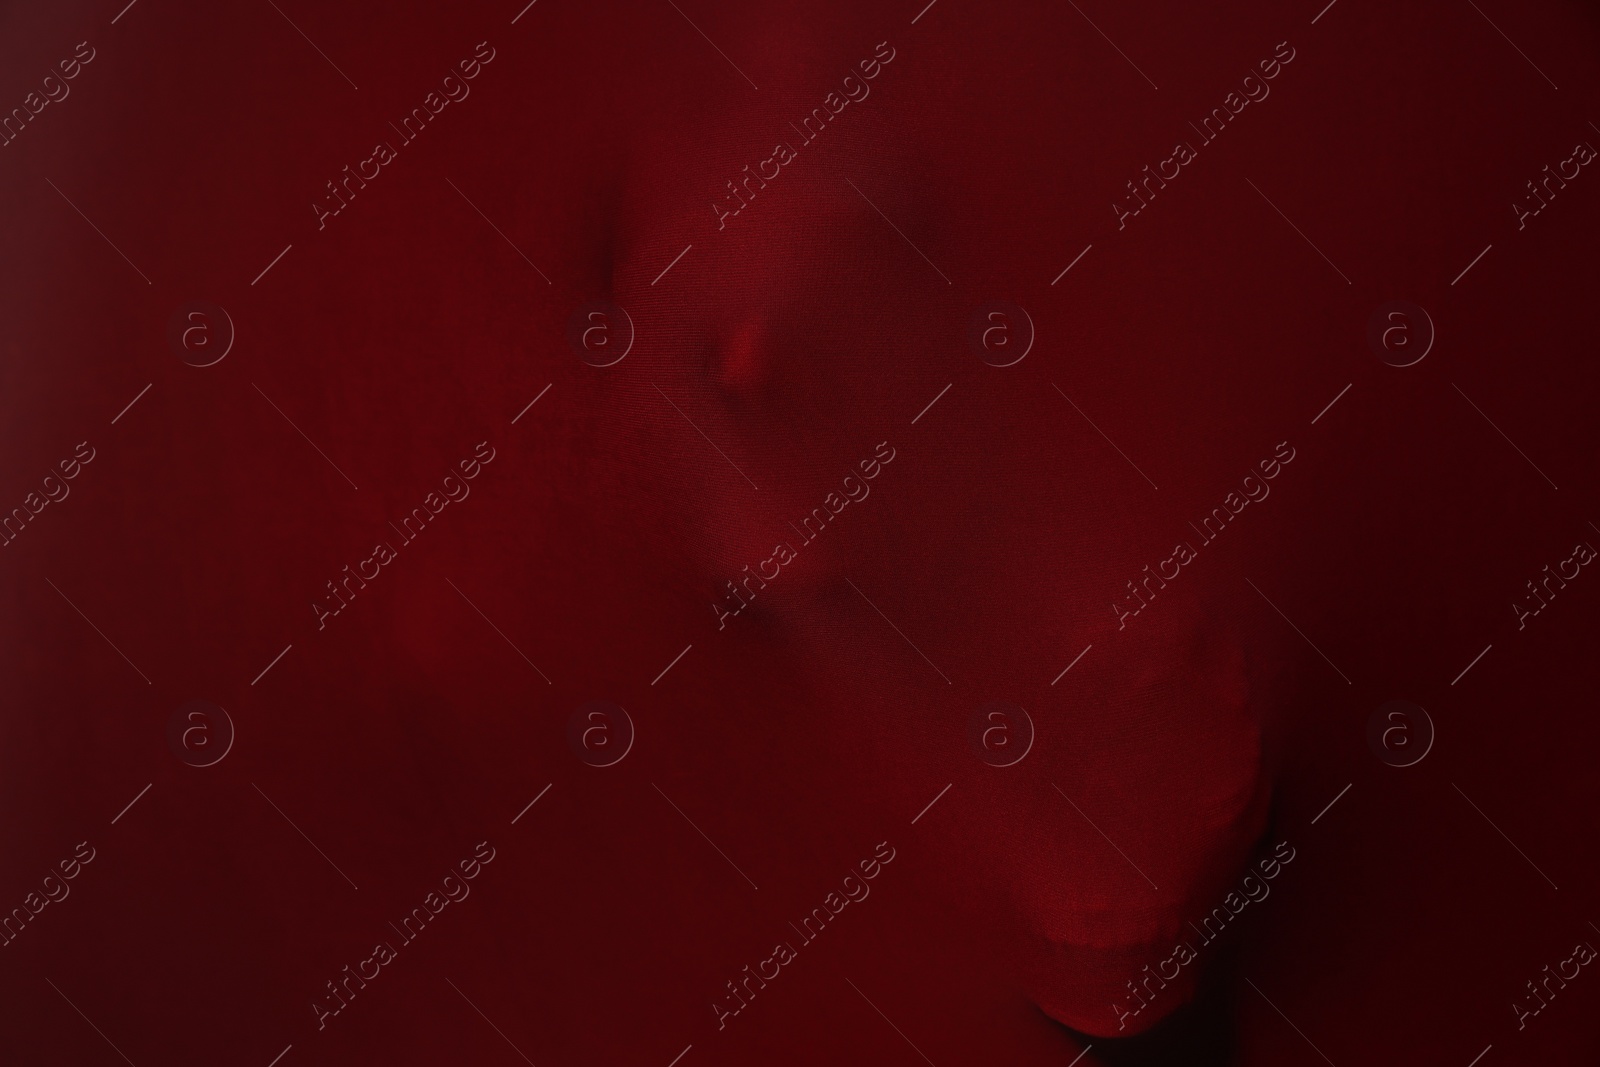 Photo of Silhouette of creepy ghost with skulls behind red cloth